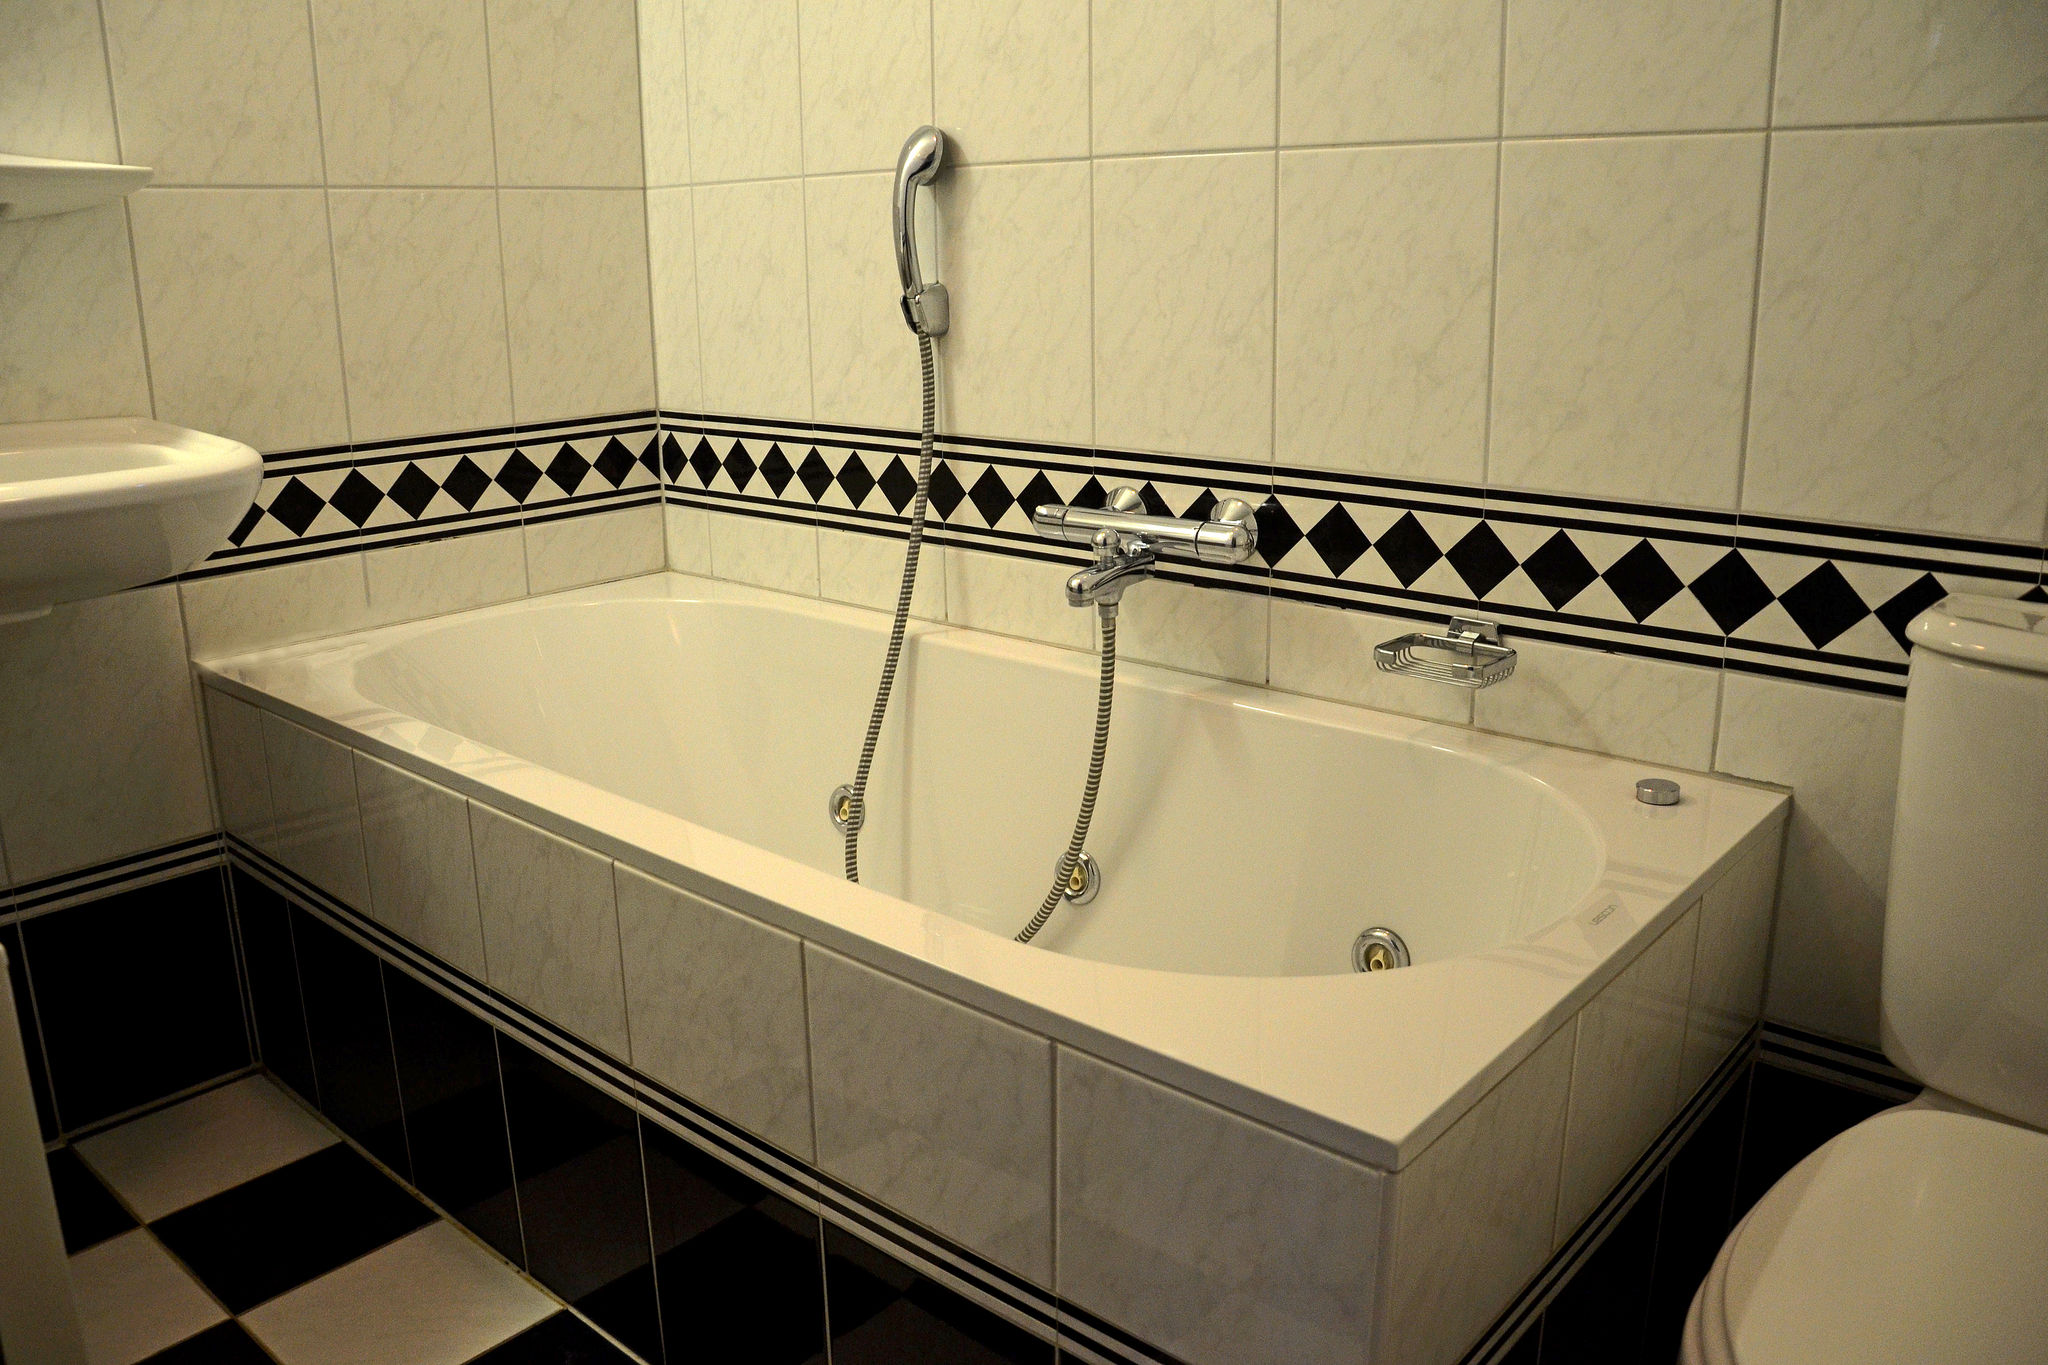 Holiday Home with a jacuzzi, 20 km. from Assen